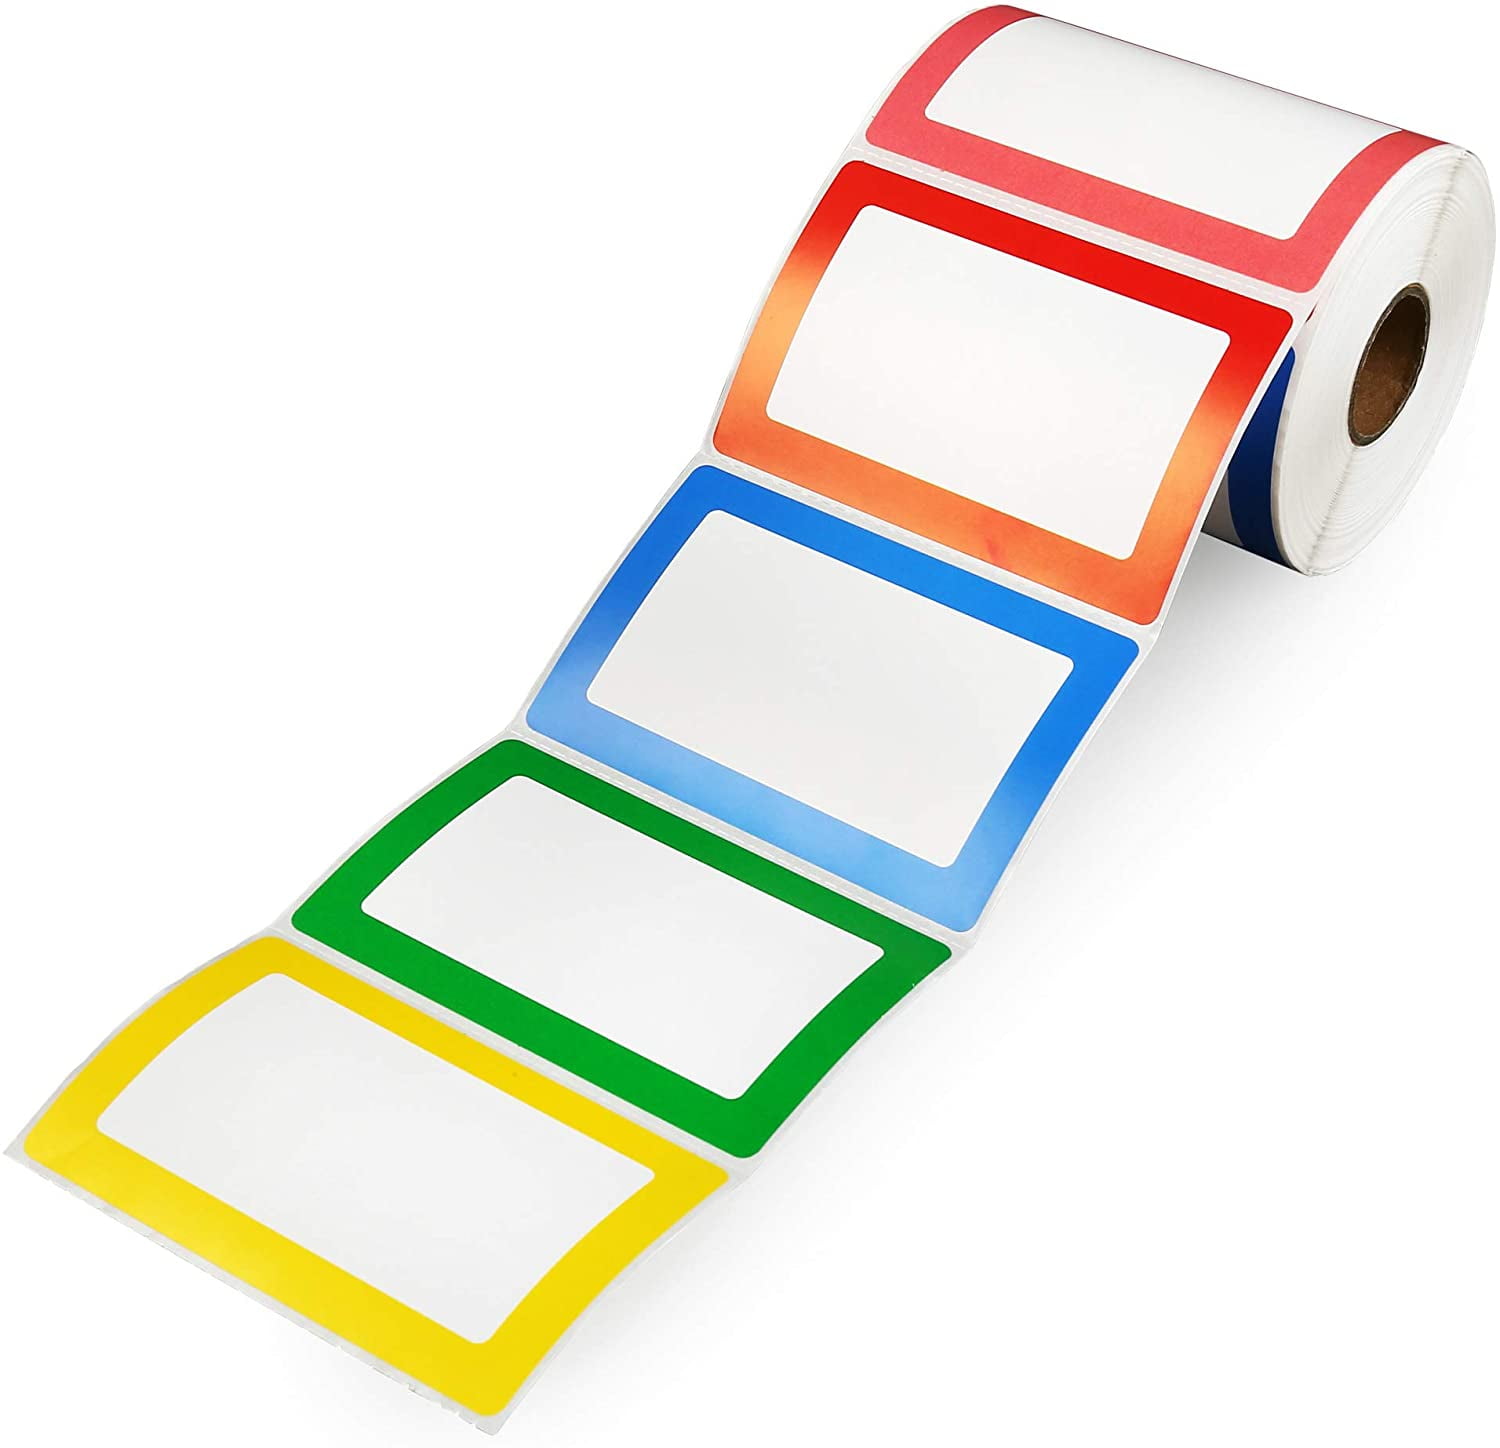 10 x 5 cm 200 Labels White Rectangular Removable Residue-Free Label Stickers Peels Off Easily